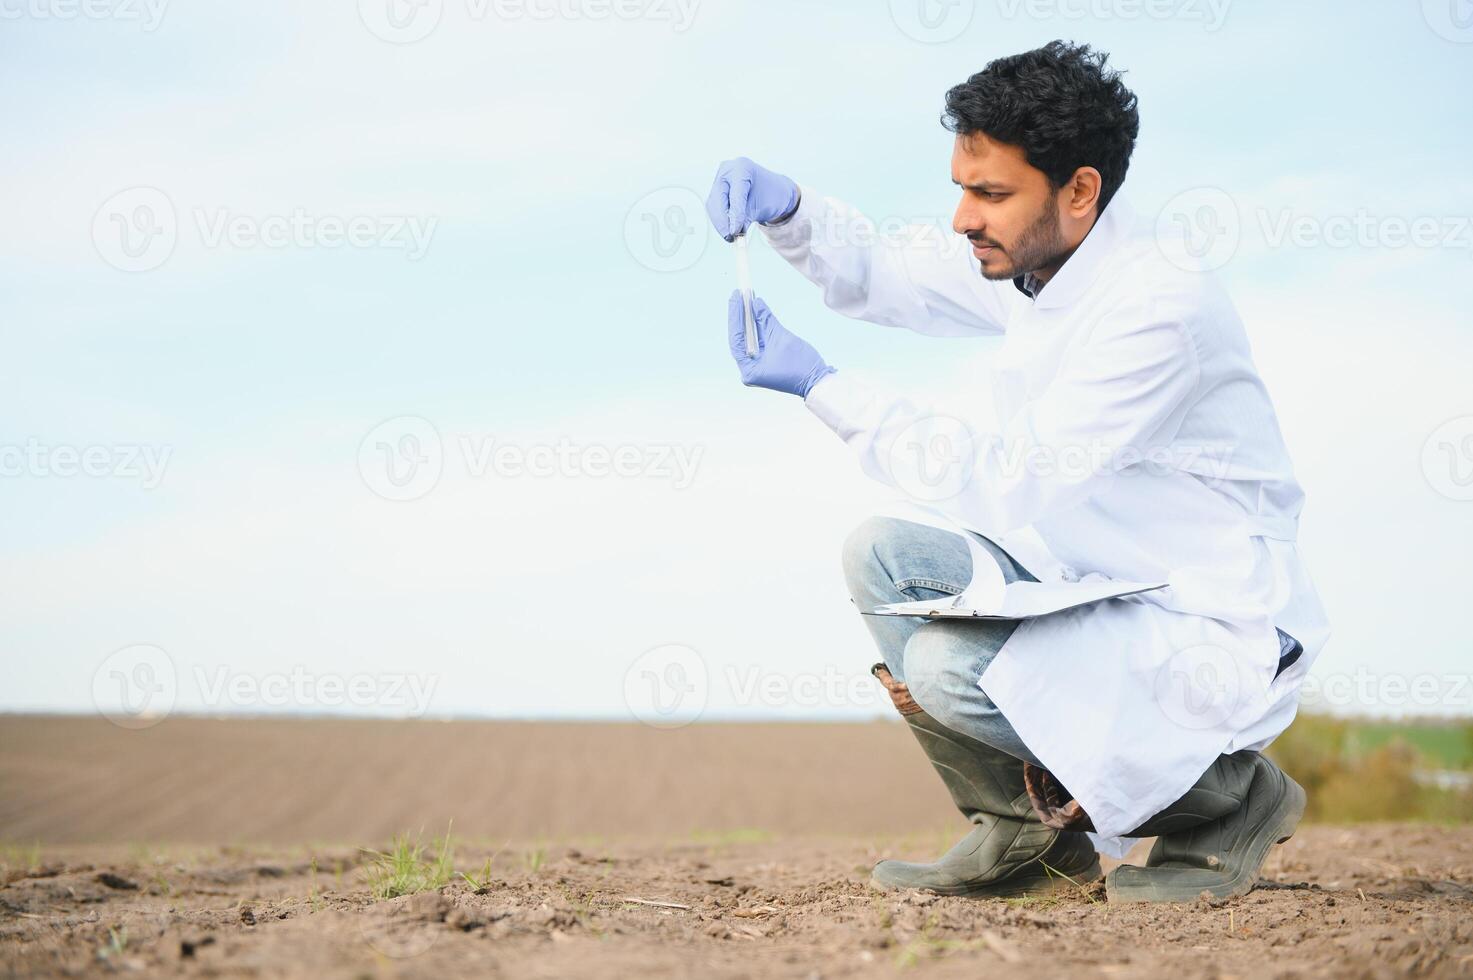 Soil Testing. Indian Agronomy Specialist taking soil sample for fertility analysis. Hands in gloves close up. Environmental protection, organic soil certification, field work, research photo